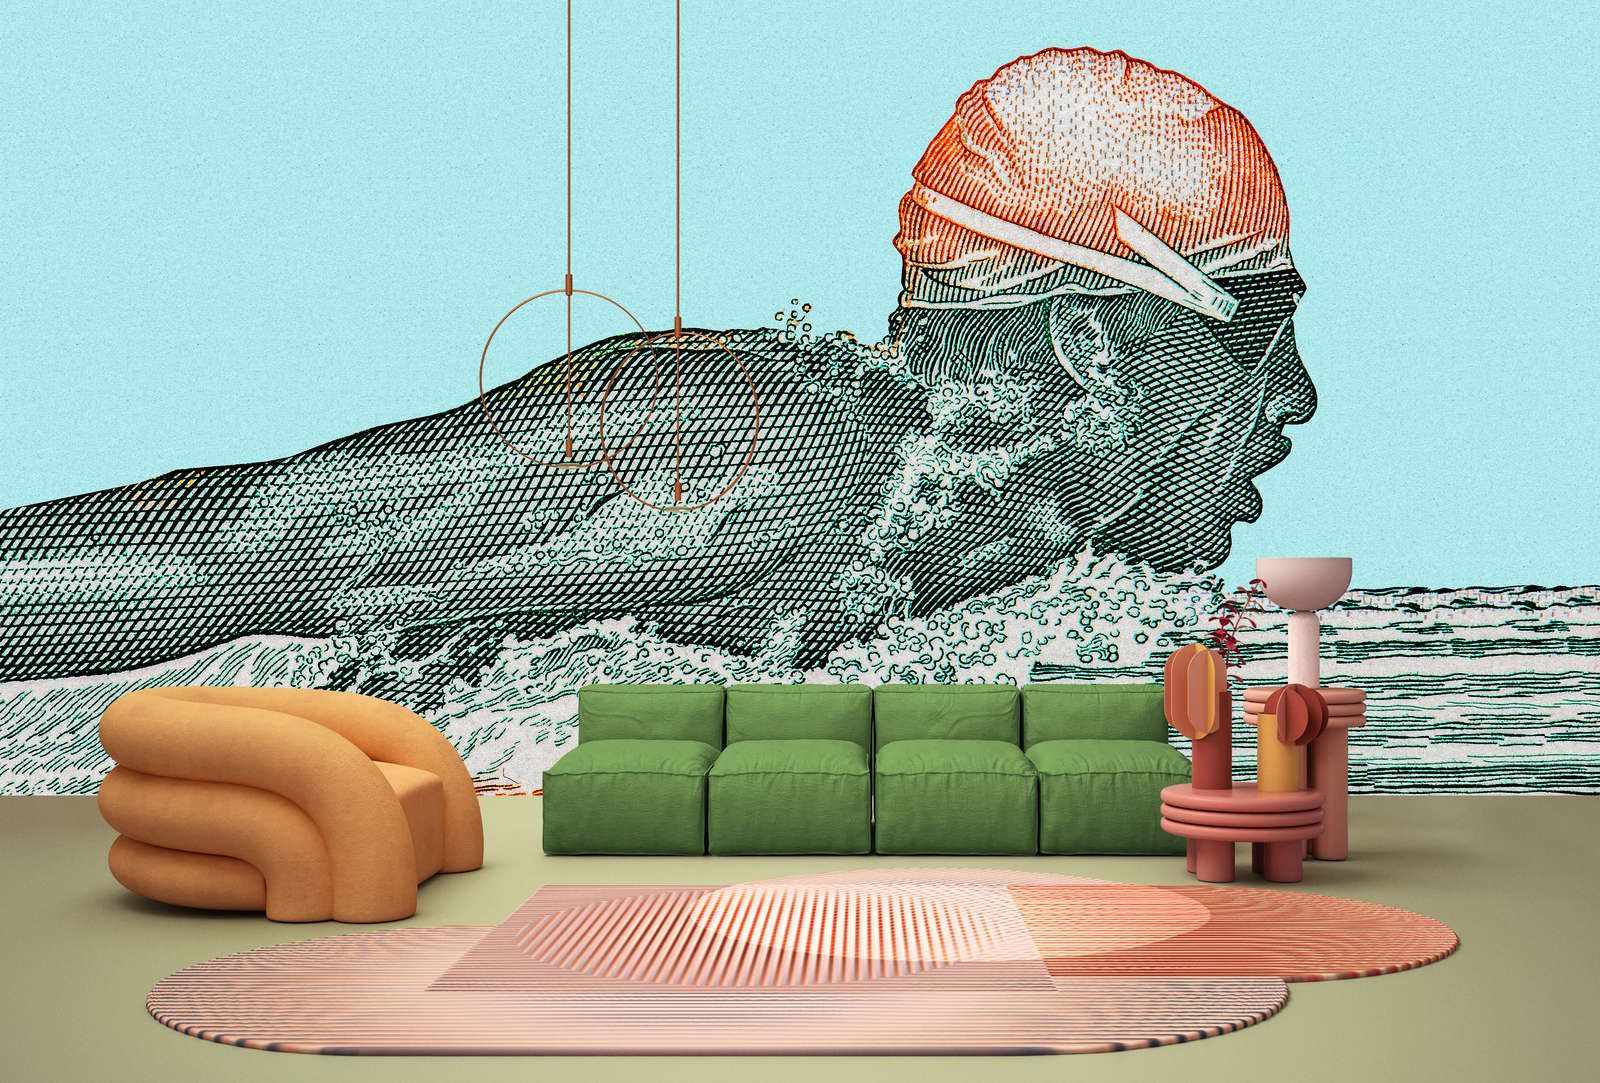             Photo wallpaper »aquaman« - swimmer in pixel design - petrol with kraft paper texture | lightly textured non-woven
        